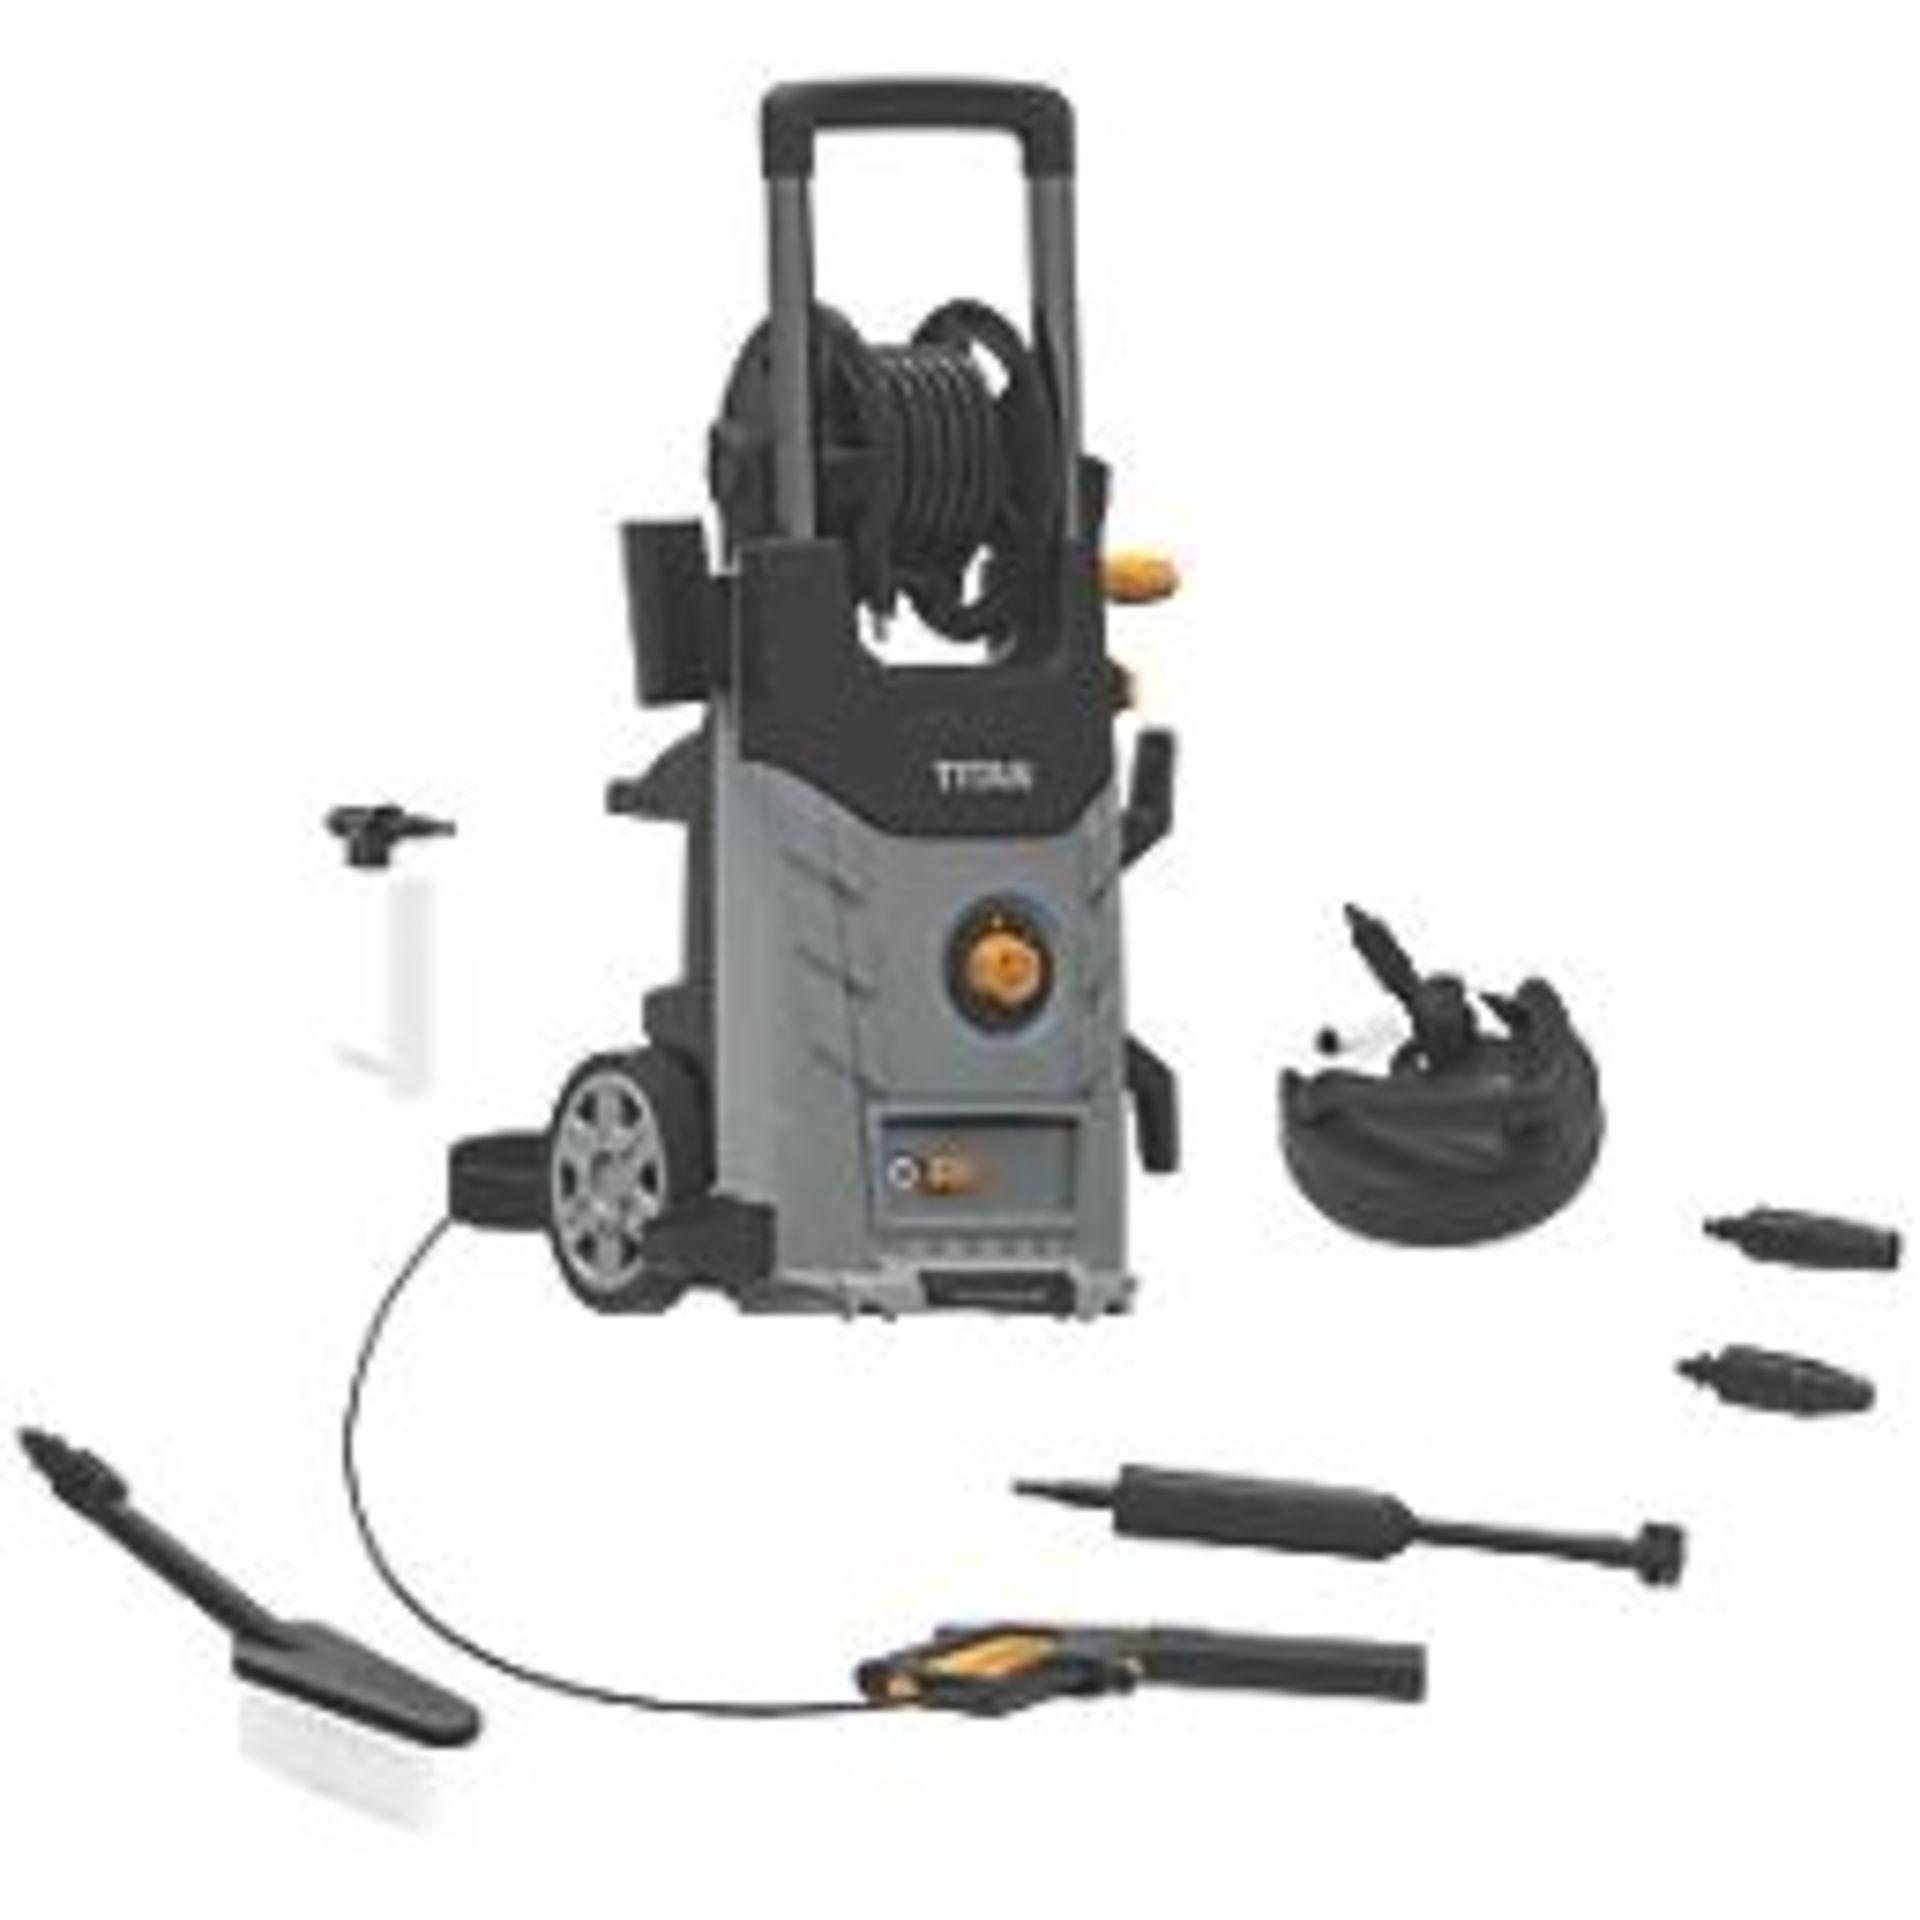 TITAN TTB2200PRW 150BAR ELECTRIC HIGH PRESSURE WASHER 2.2KW 230V. - PW. Compact design with space-